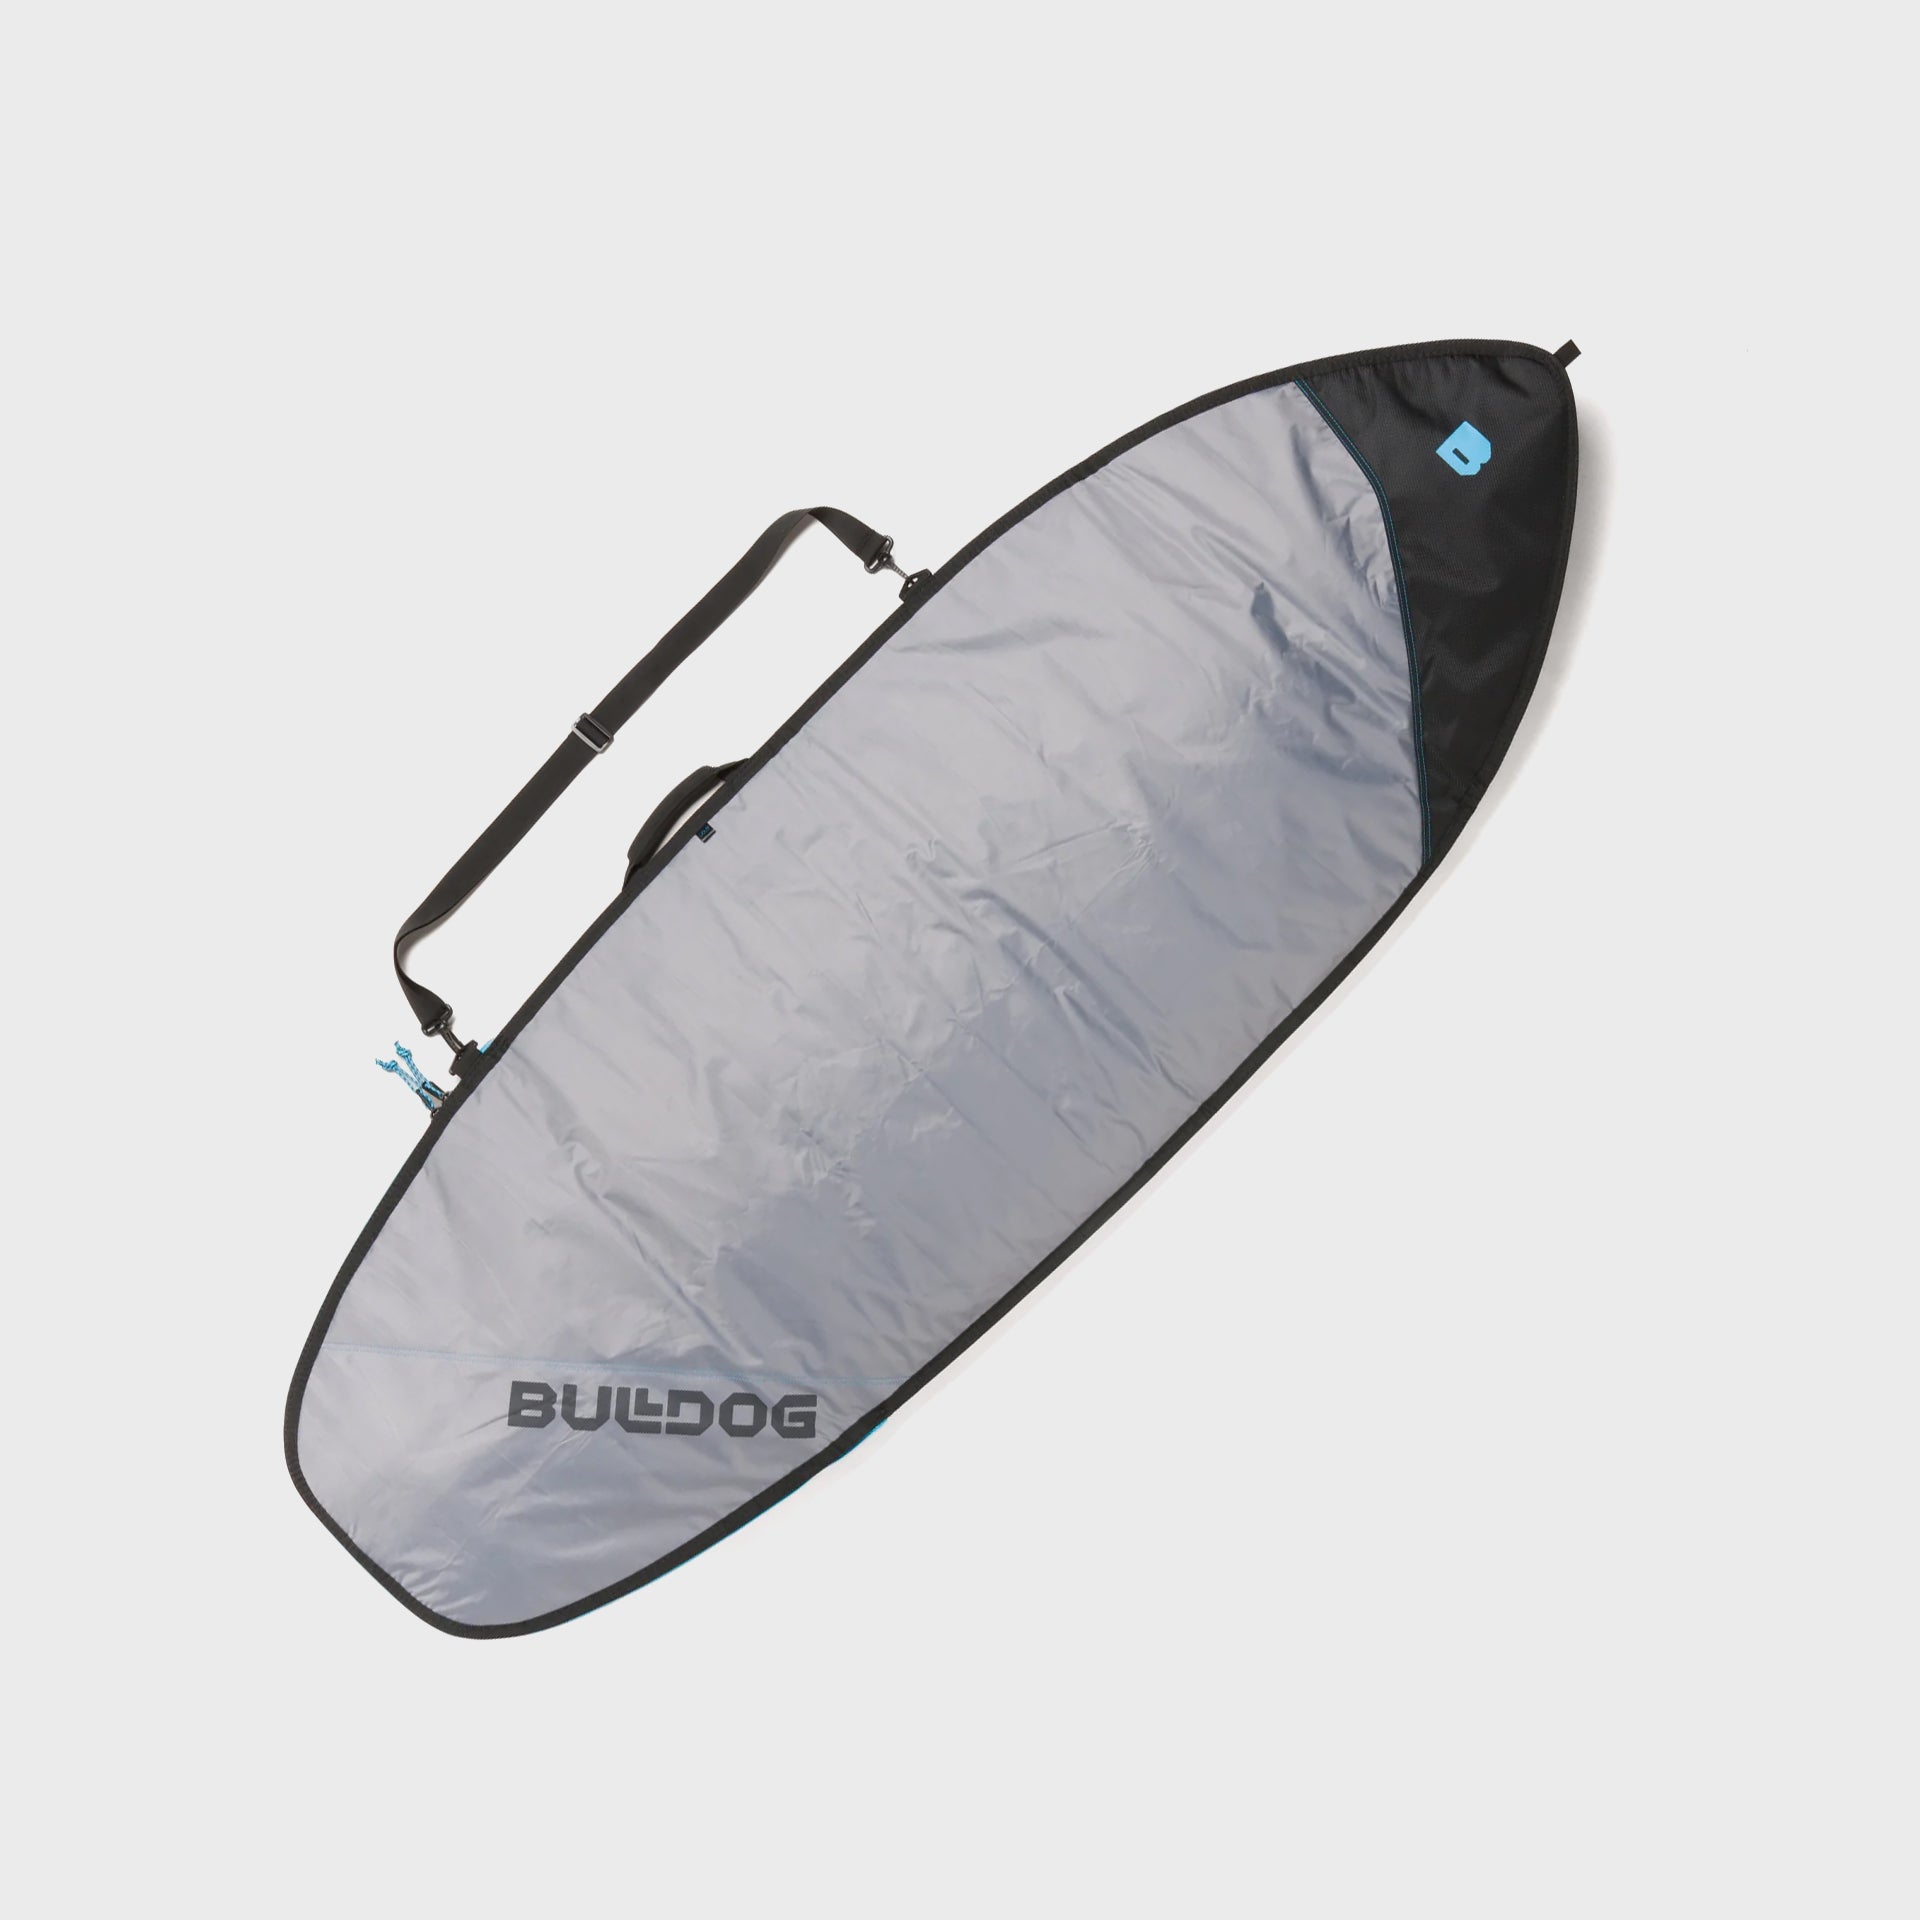 Bulldog Essentials Fish Surfboard Bag - Grey/Cyan - Collect in store only - ManGo Surfing